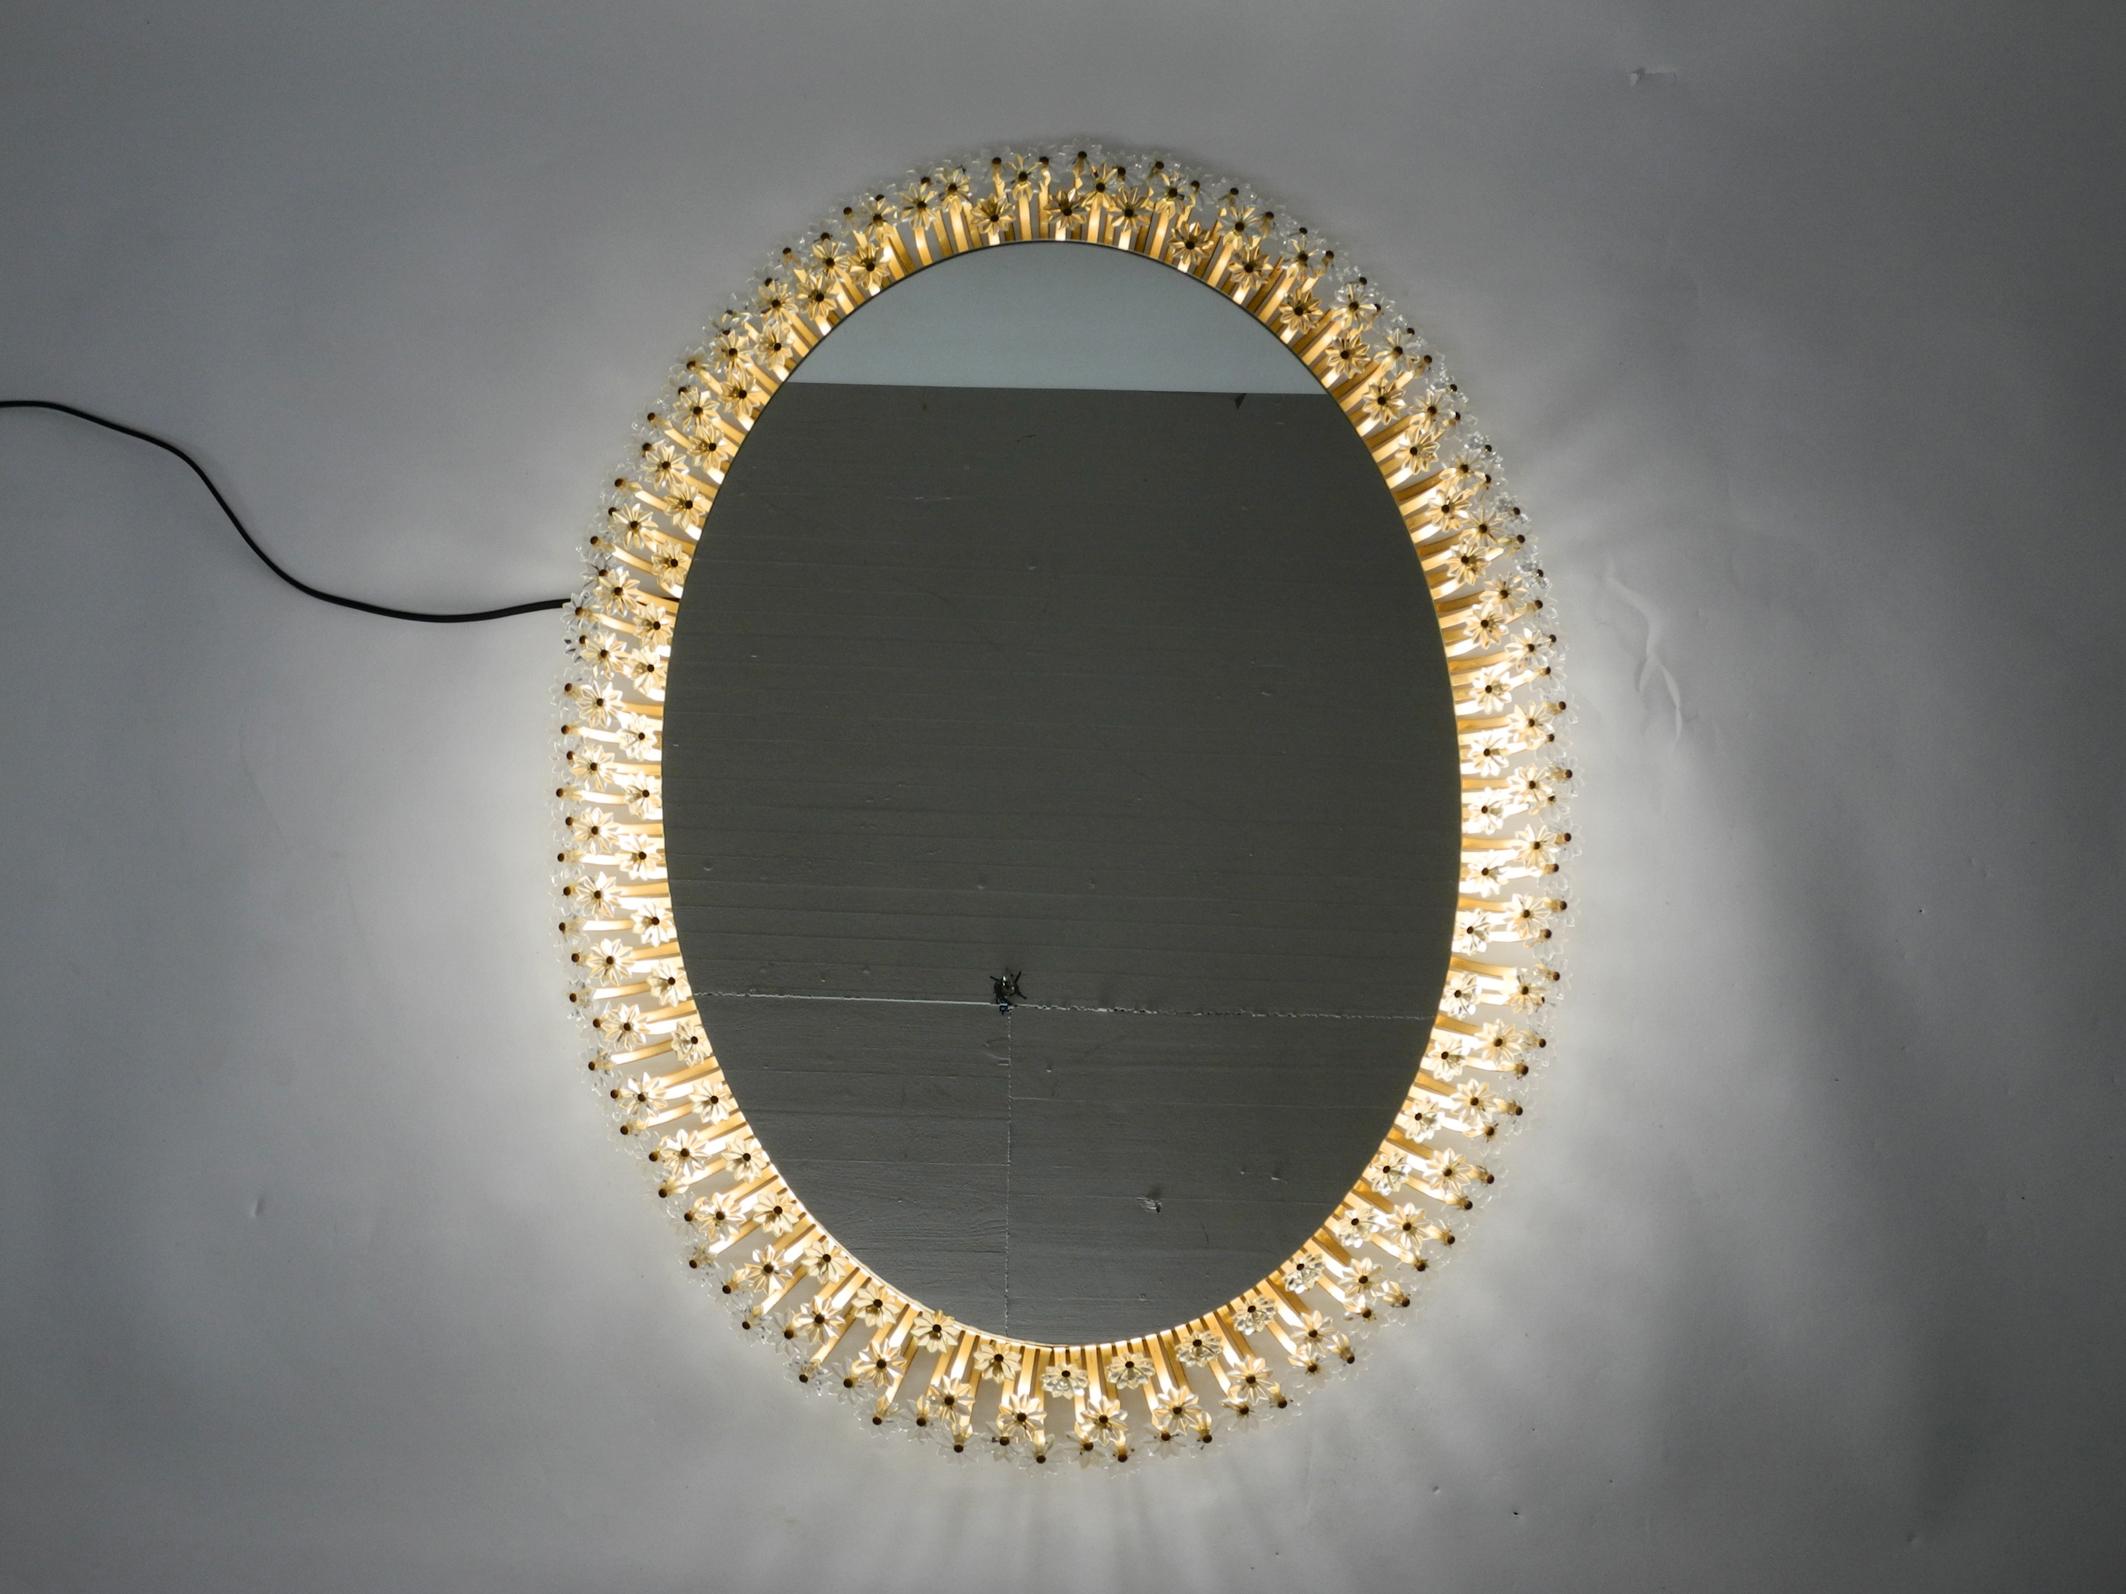 Mid-Century Modern Large Oval 50s Illuminated Flower Mirror by Schöninger with a Gold-Colored Frame